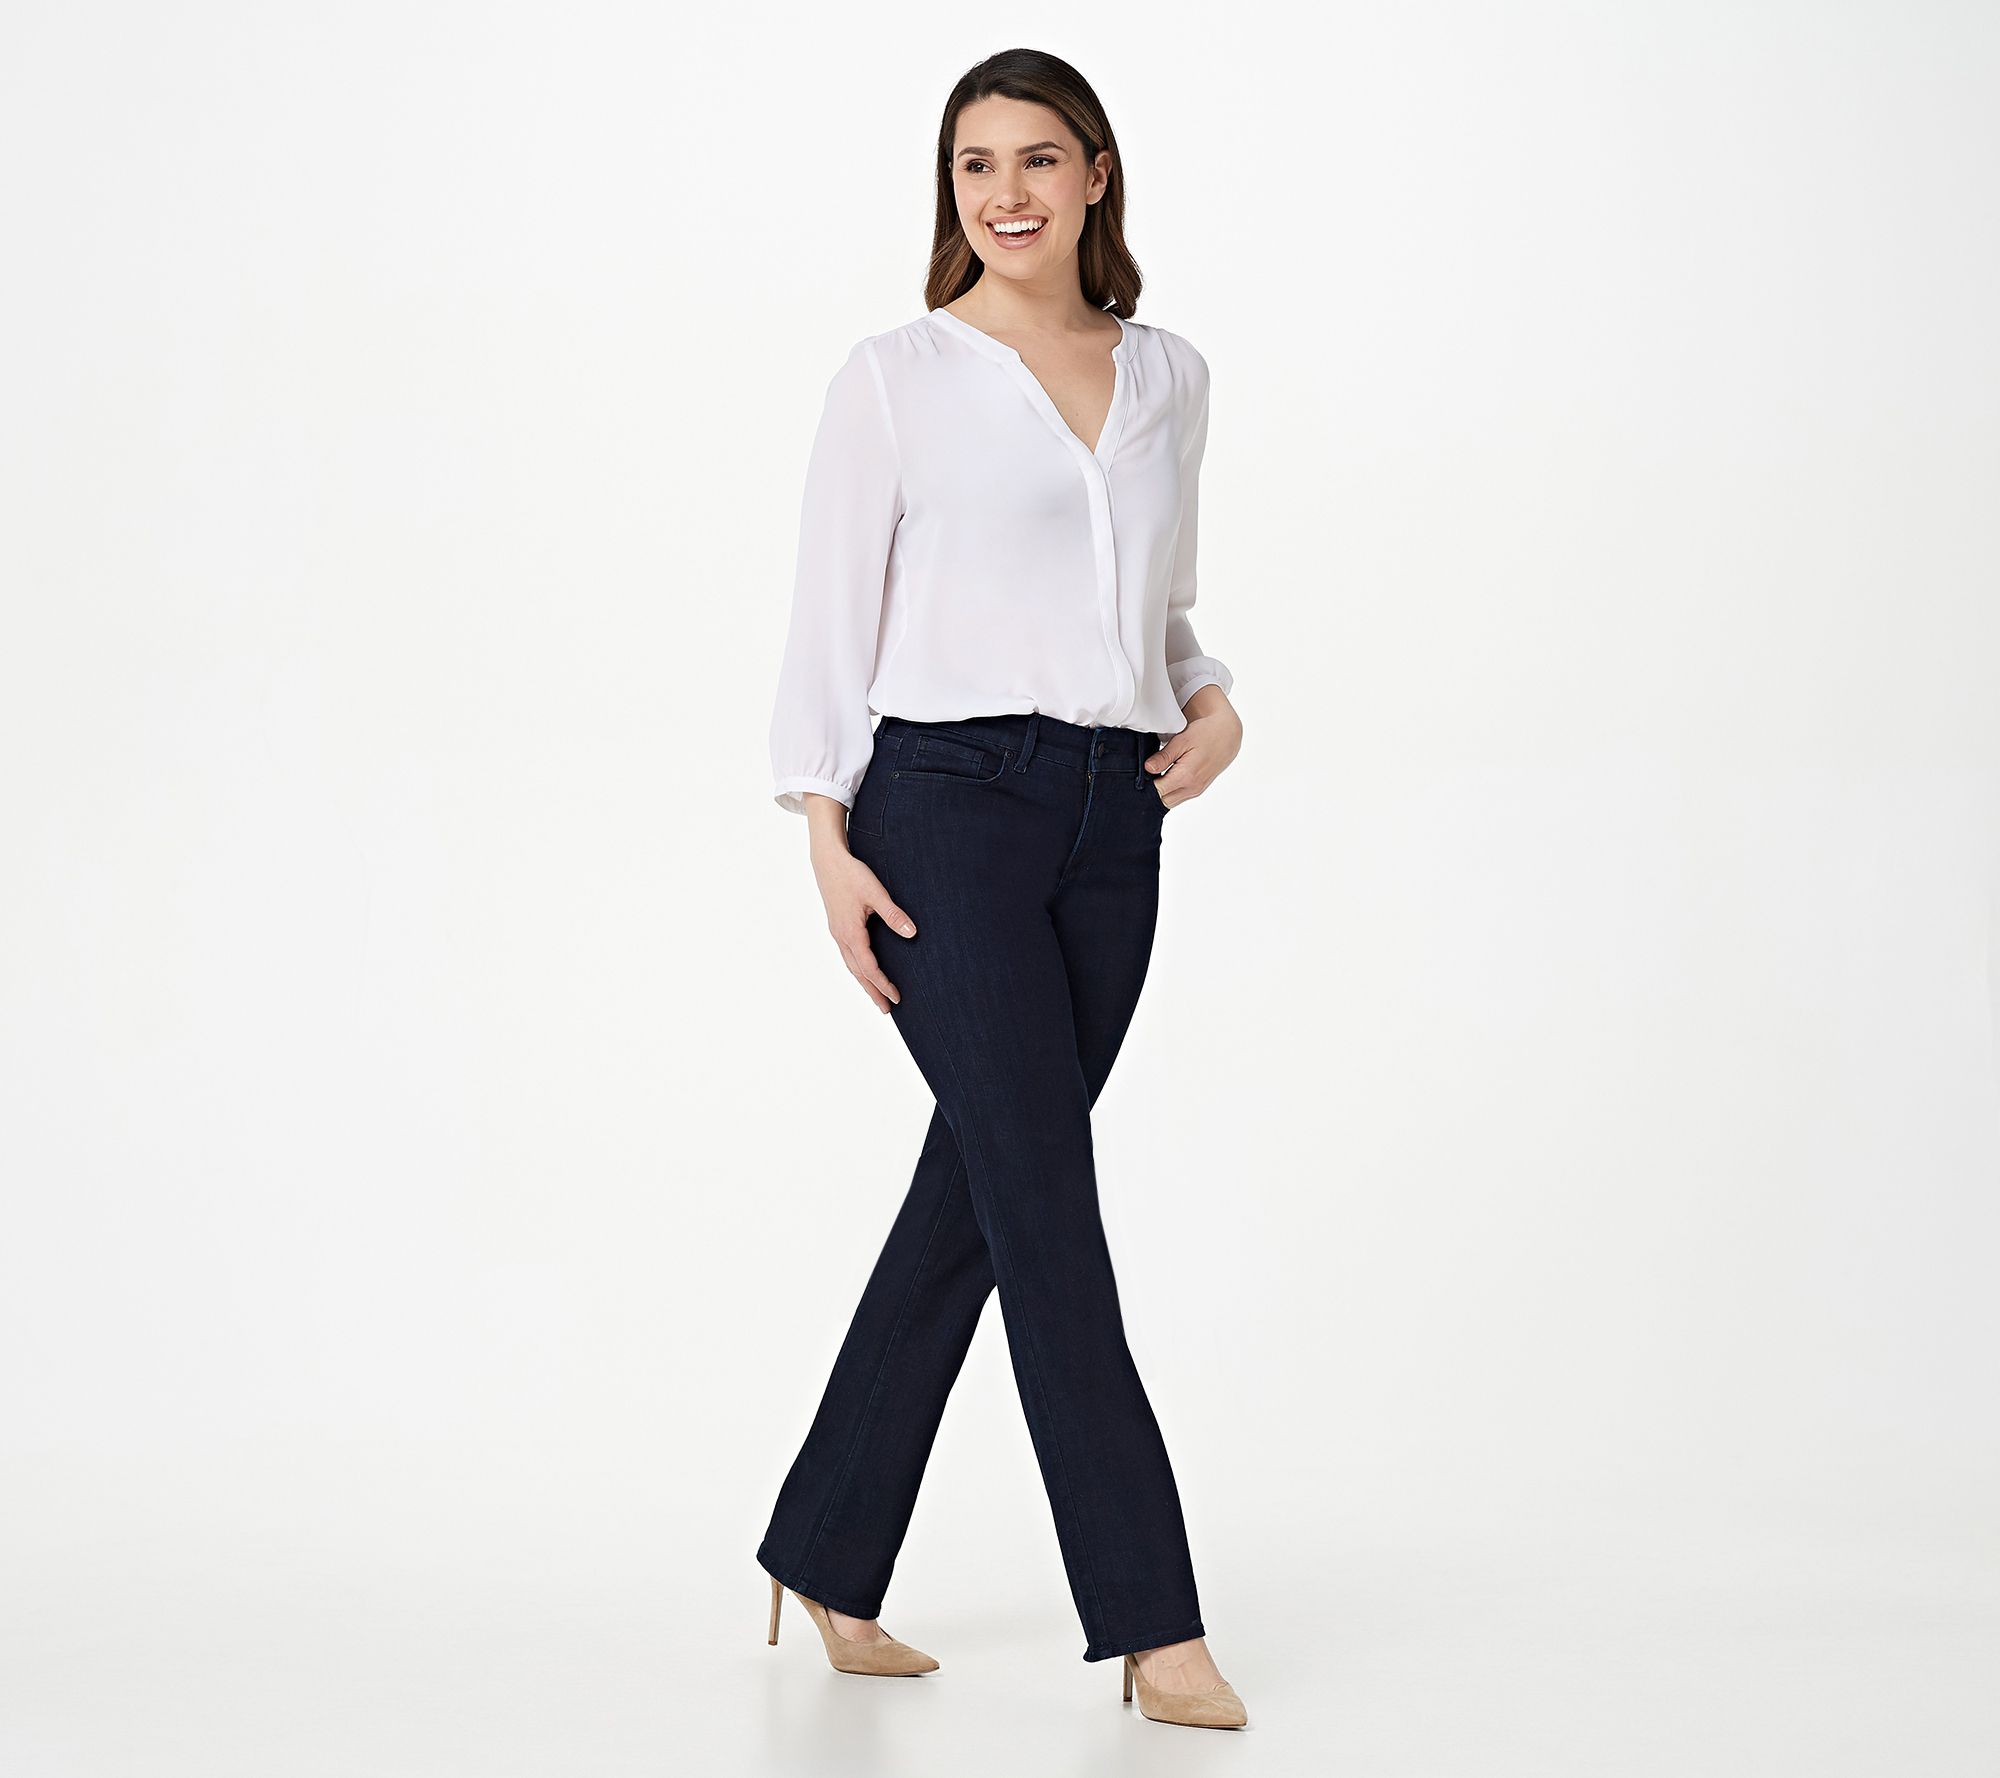 NYDJ Marilyn Straight Uplift Jeans in Cool Embrace - Rinse - QVC.com